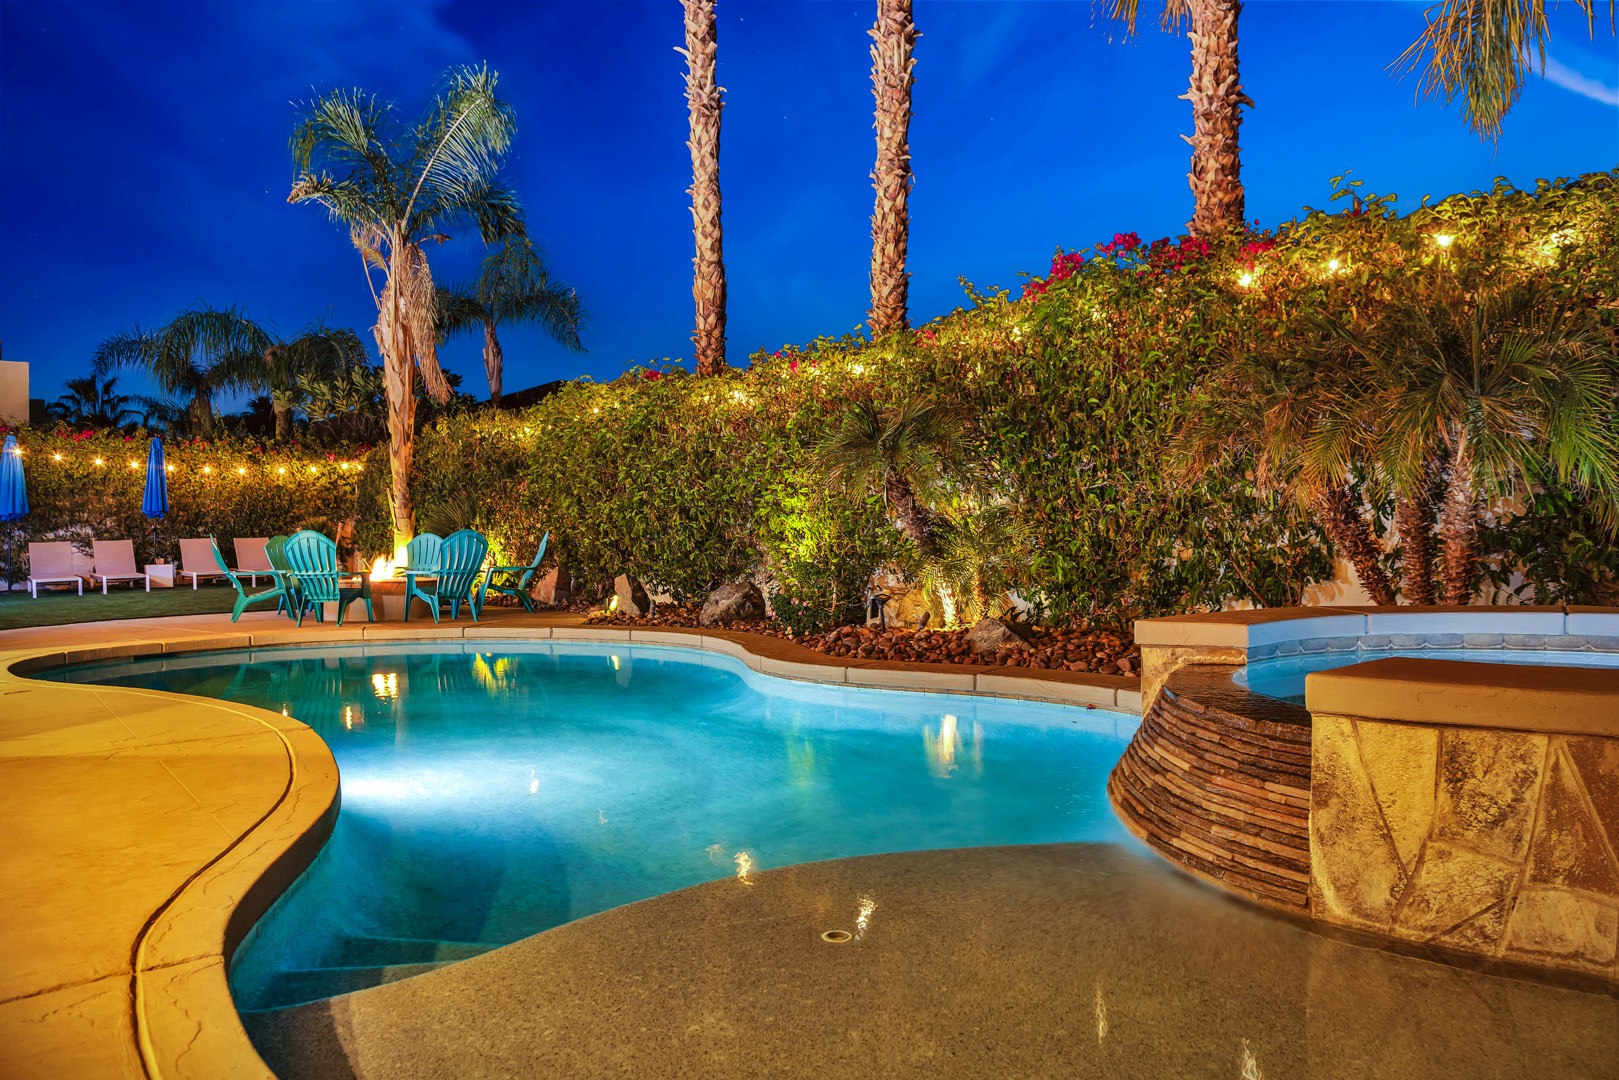 We provide pool towels and just about anything you need for your desert getaway